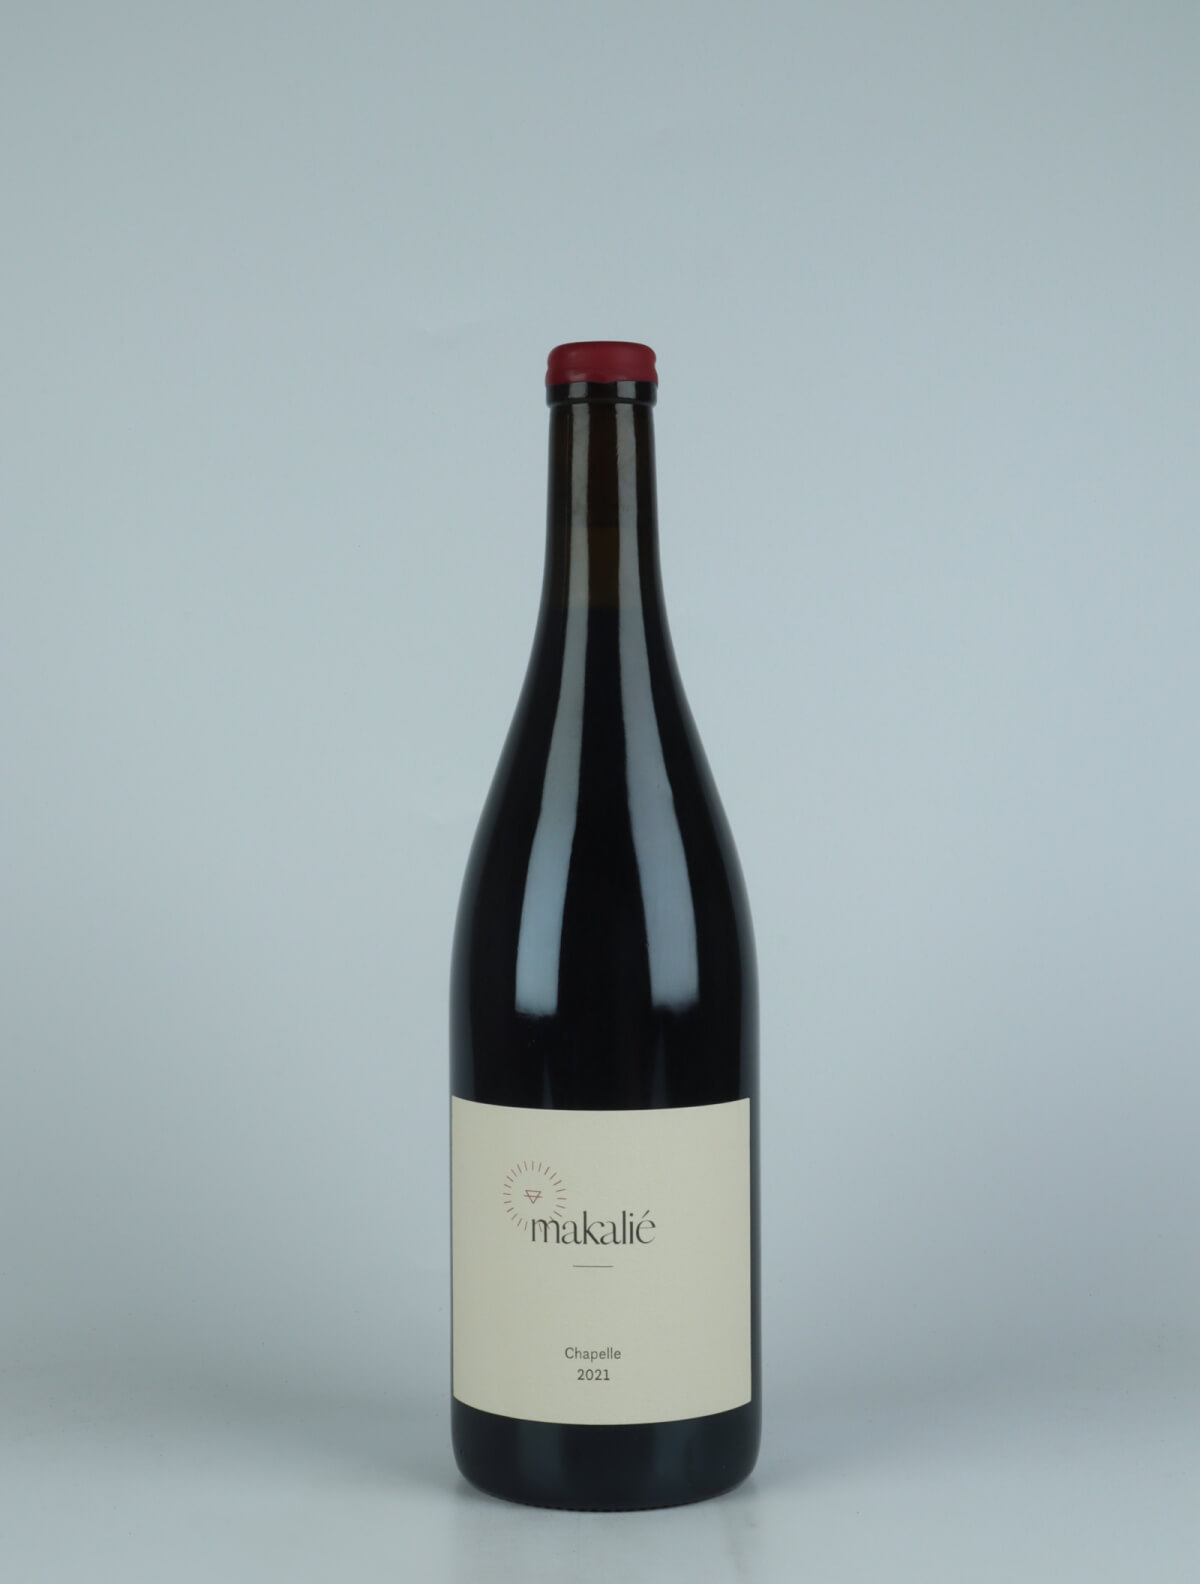 A bottle 2021 Chapelle Red wine from Makalié, Baden in Germany